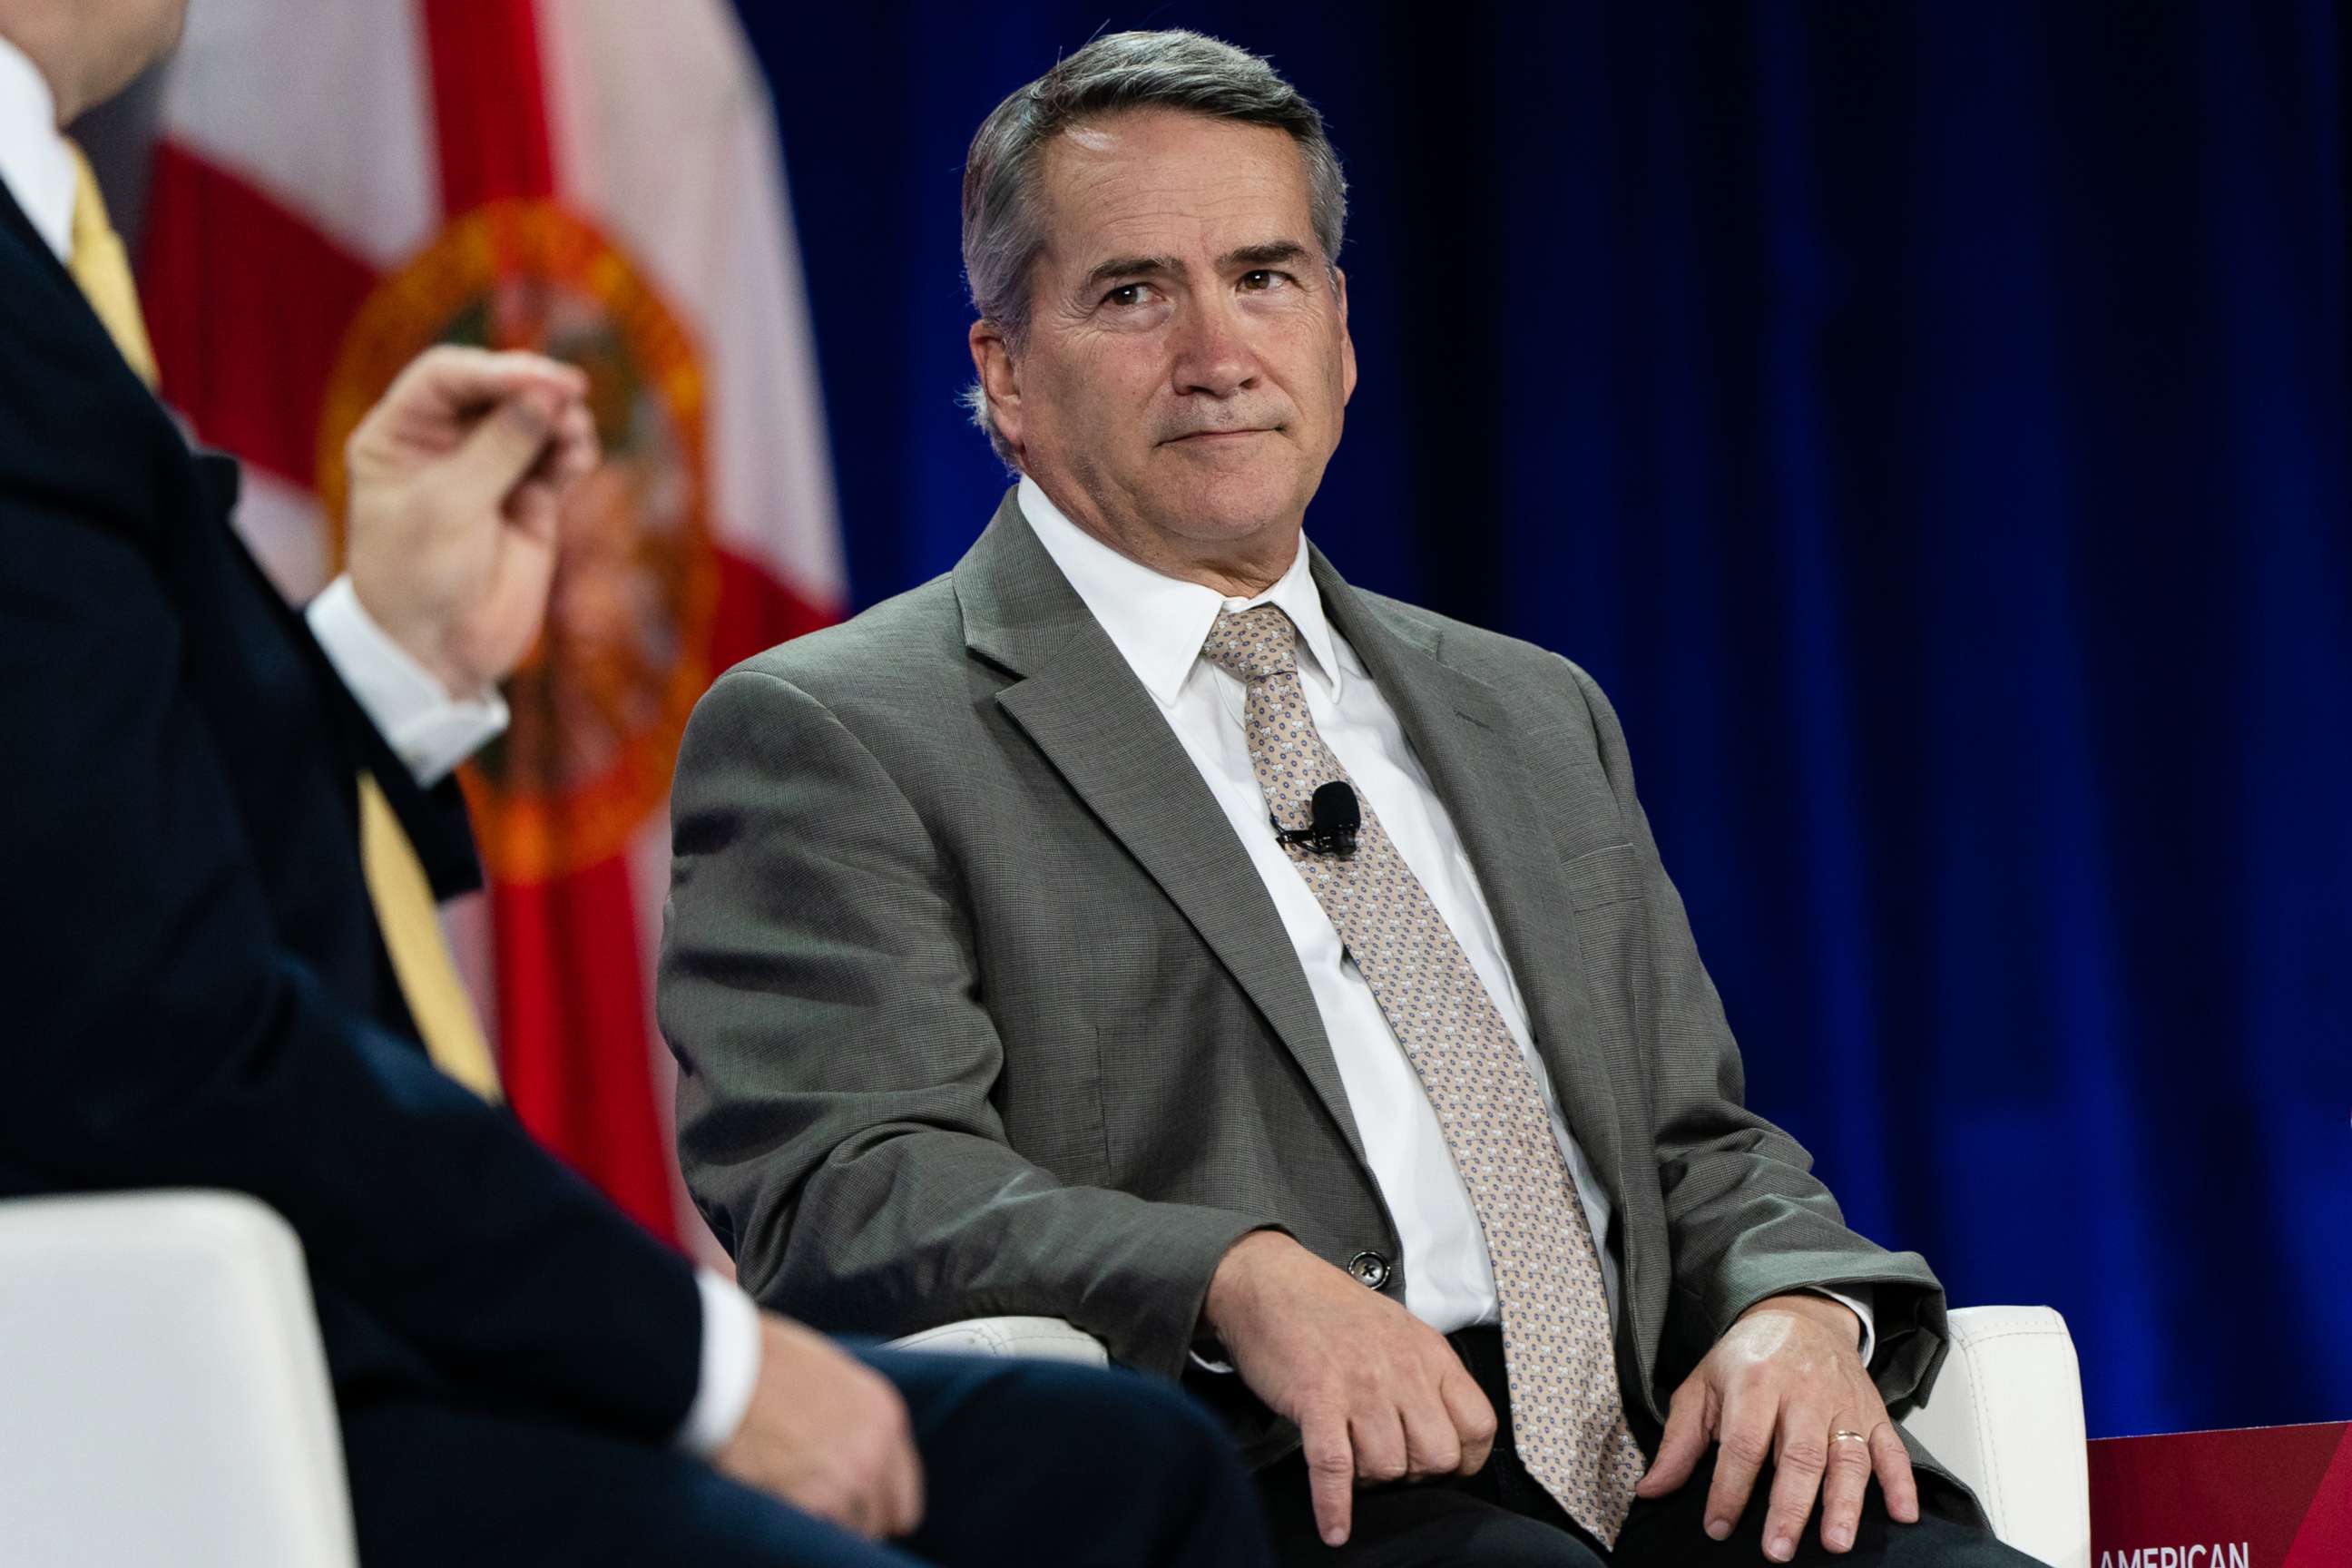 PHOTO: Representative Jody Hice, a Republican from Georgia, listens during a panel at the Conservative Political Action Conference (CPAC) in Orlando, Fla., Feb. 27, 2021.